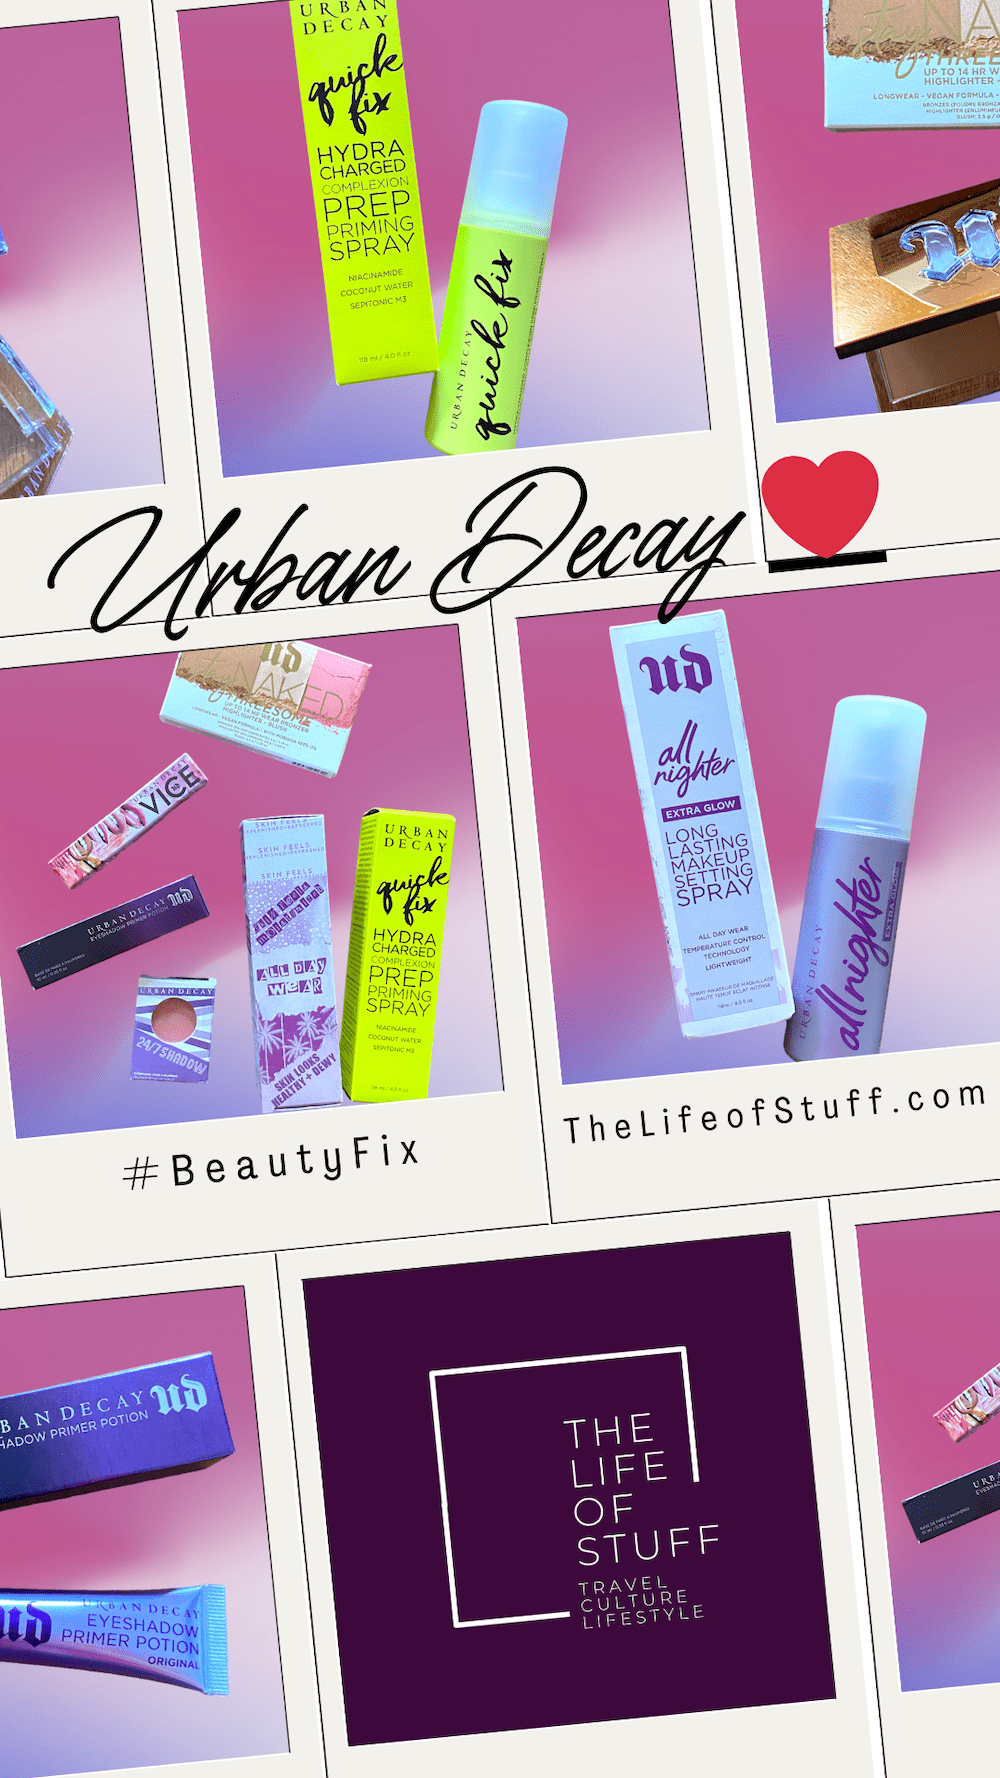 All Day Every Day Urban Decay Products We Love Right Now on The Life of Stuff